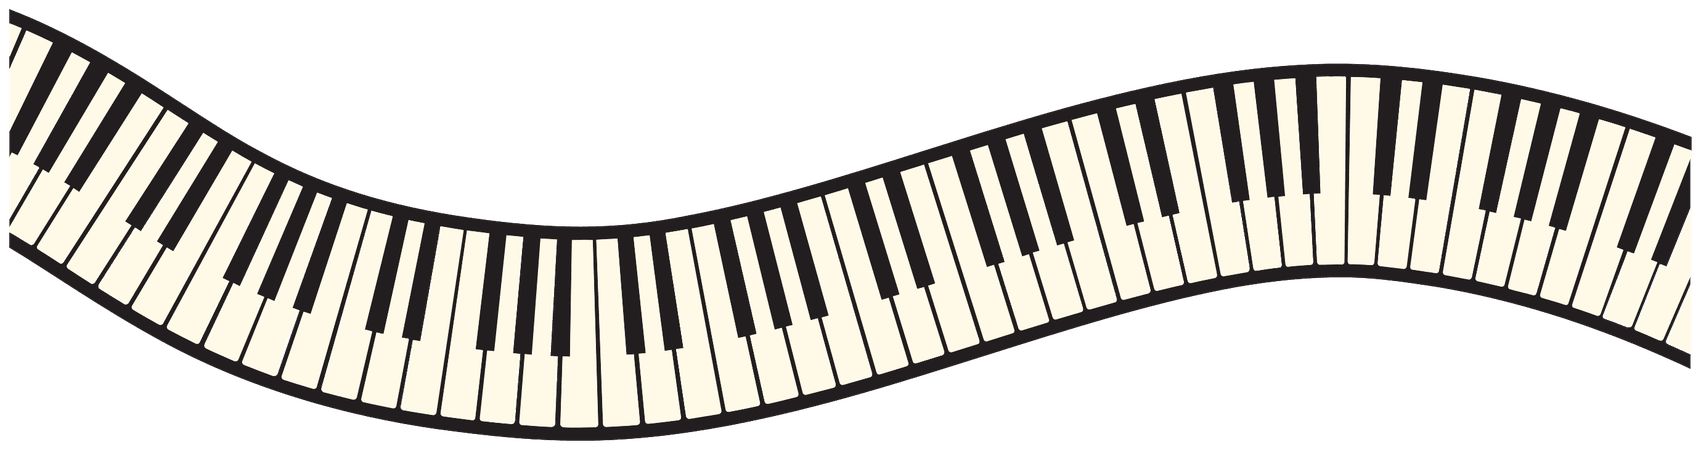 Free instrumento musical piano PNG with Transparent Background